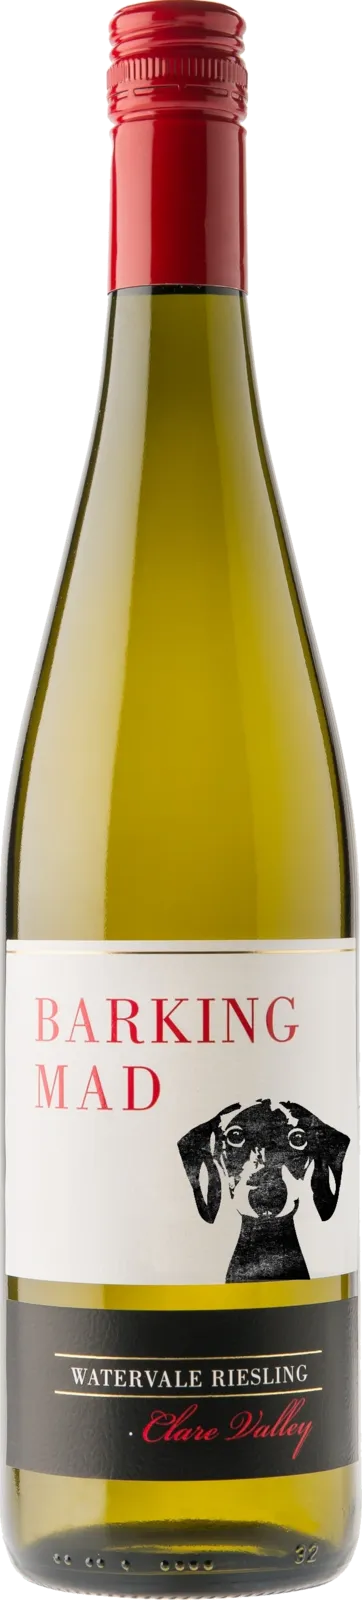 Bottle of Reillys Barking Mad Watervale Riesling from search results